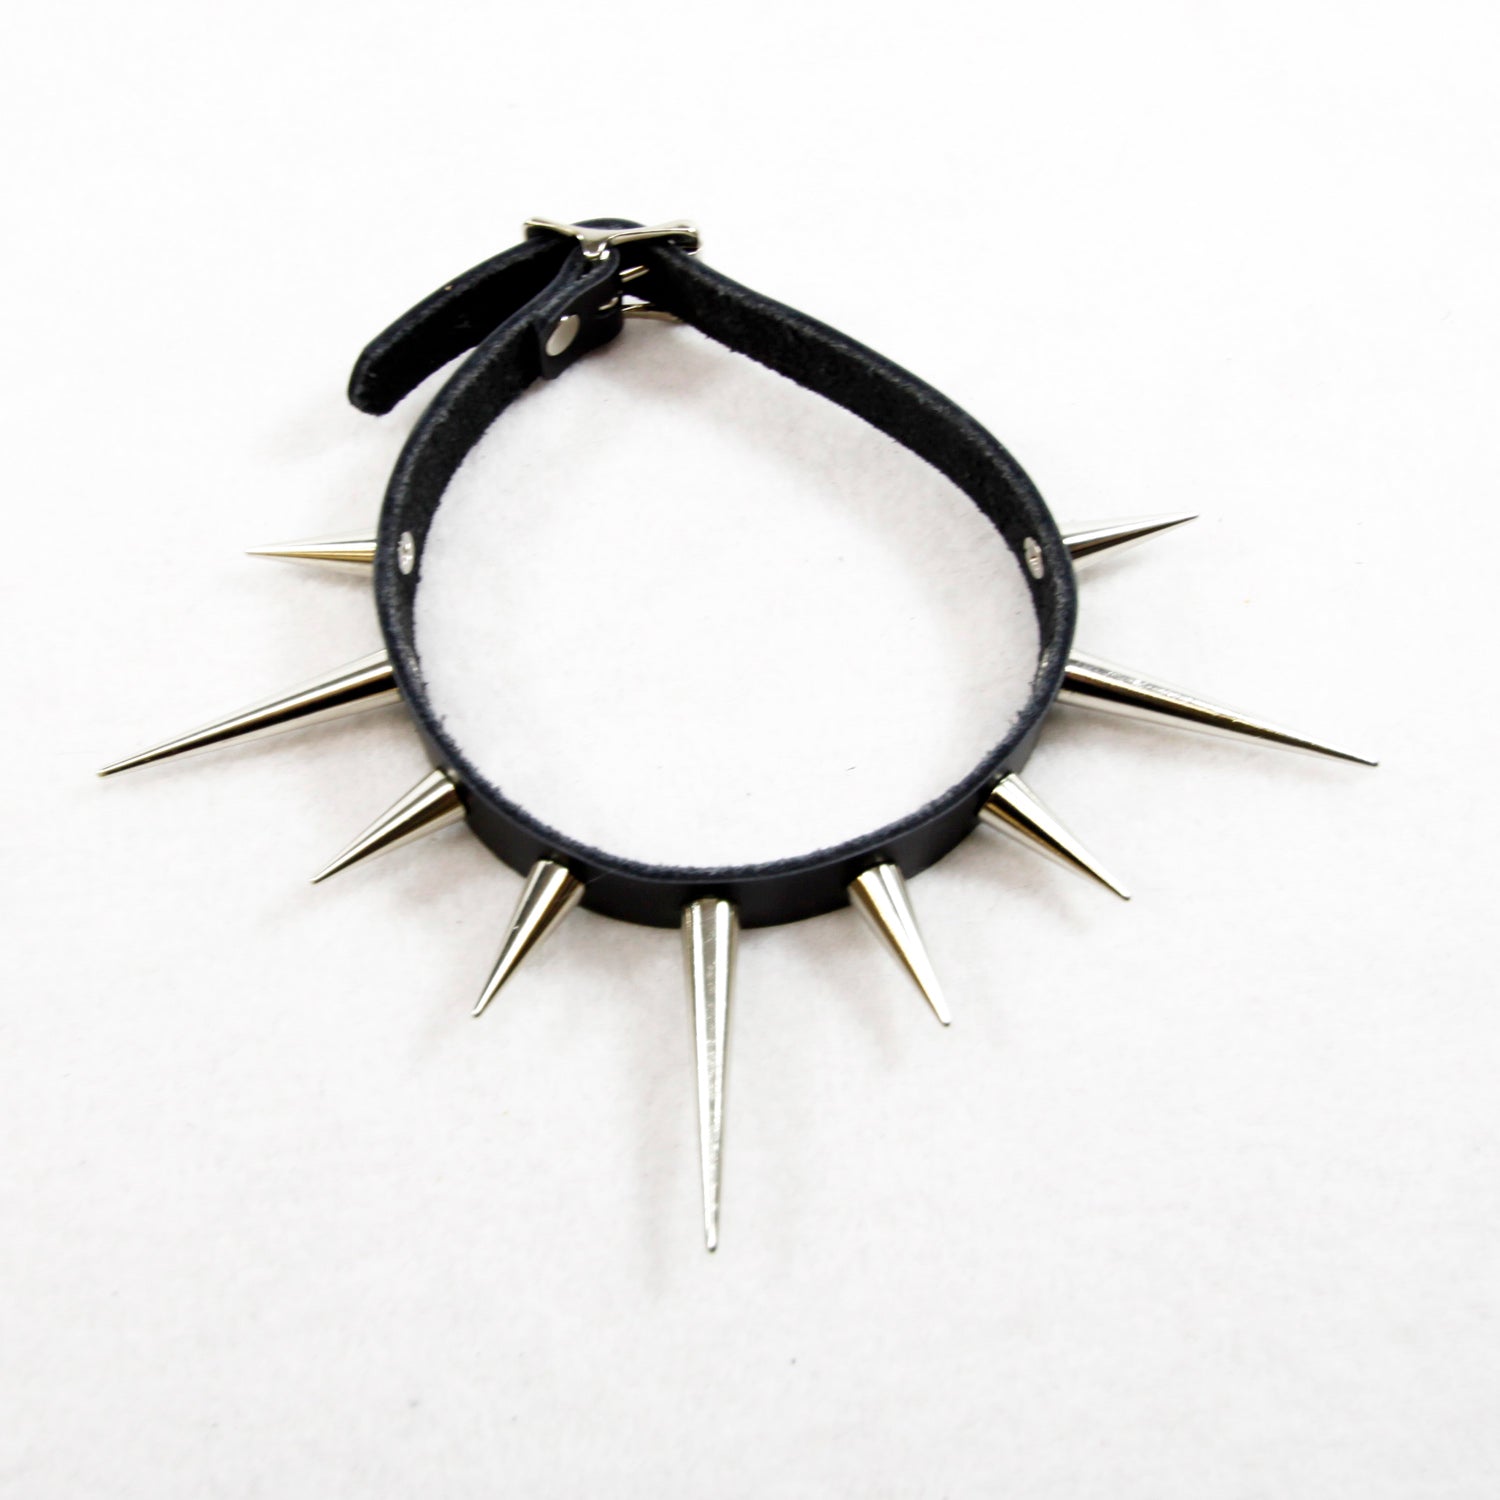 Long Spiked Collar - Pawstar Pawstar Leather Collar collar, cosplay, costume, furry, goth, leather, ship-15, ship-15day